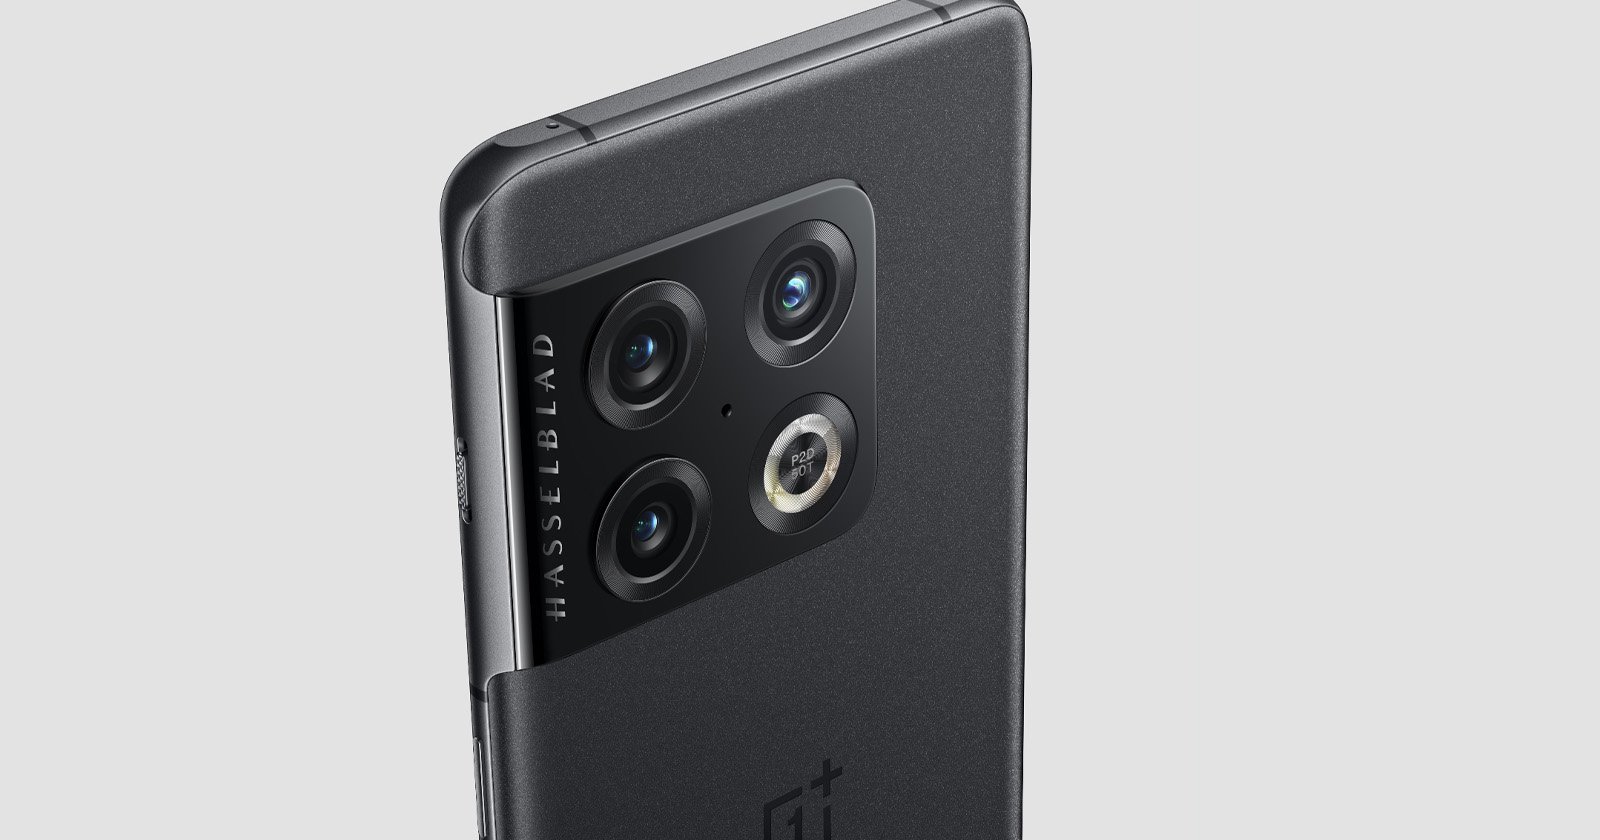 https://petapixel.com/assets/uploads/2022/03/OnePlus-10-Pro-With-2nd-Gen-Hasselblad-Camera-Launches-in-the-U.S.-6.jpg